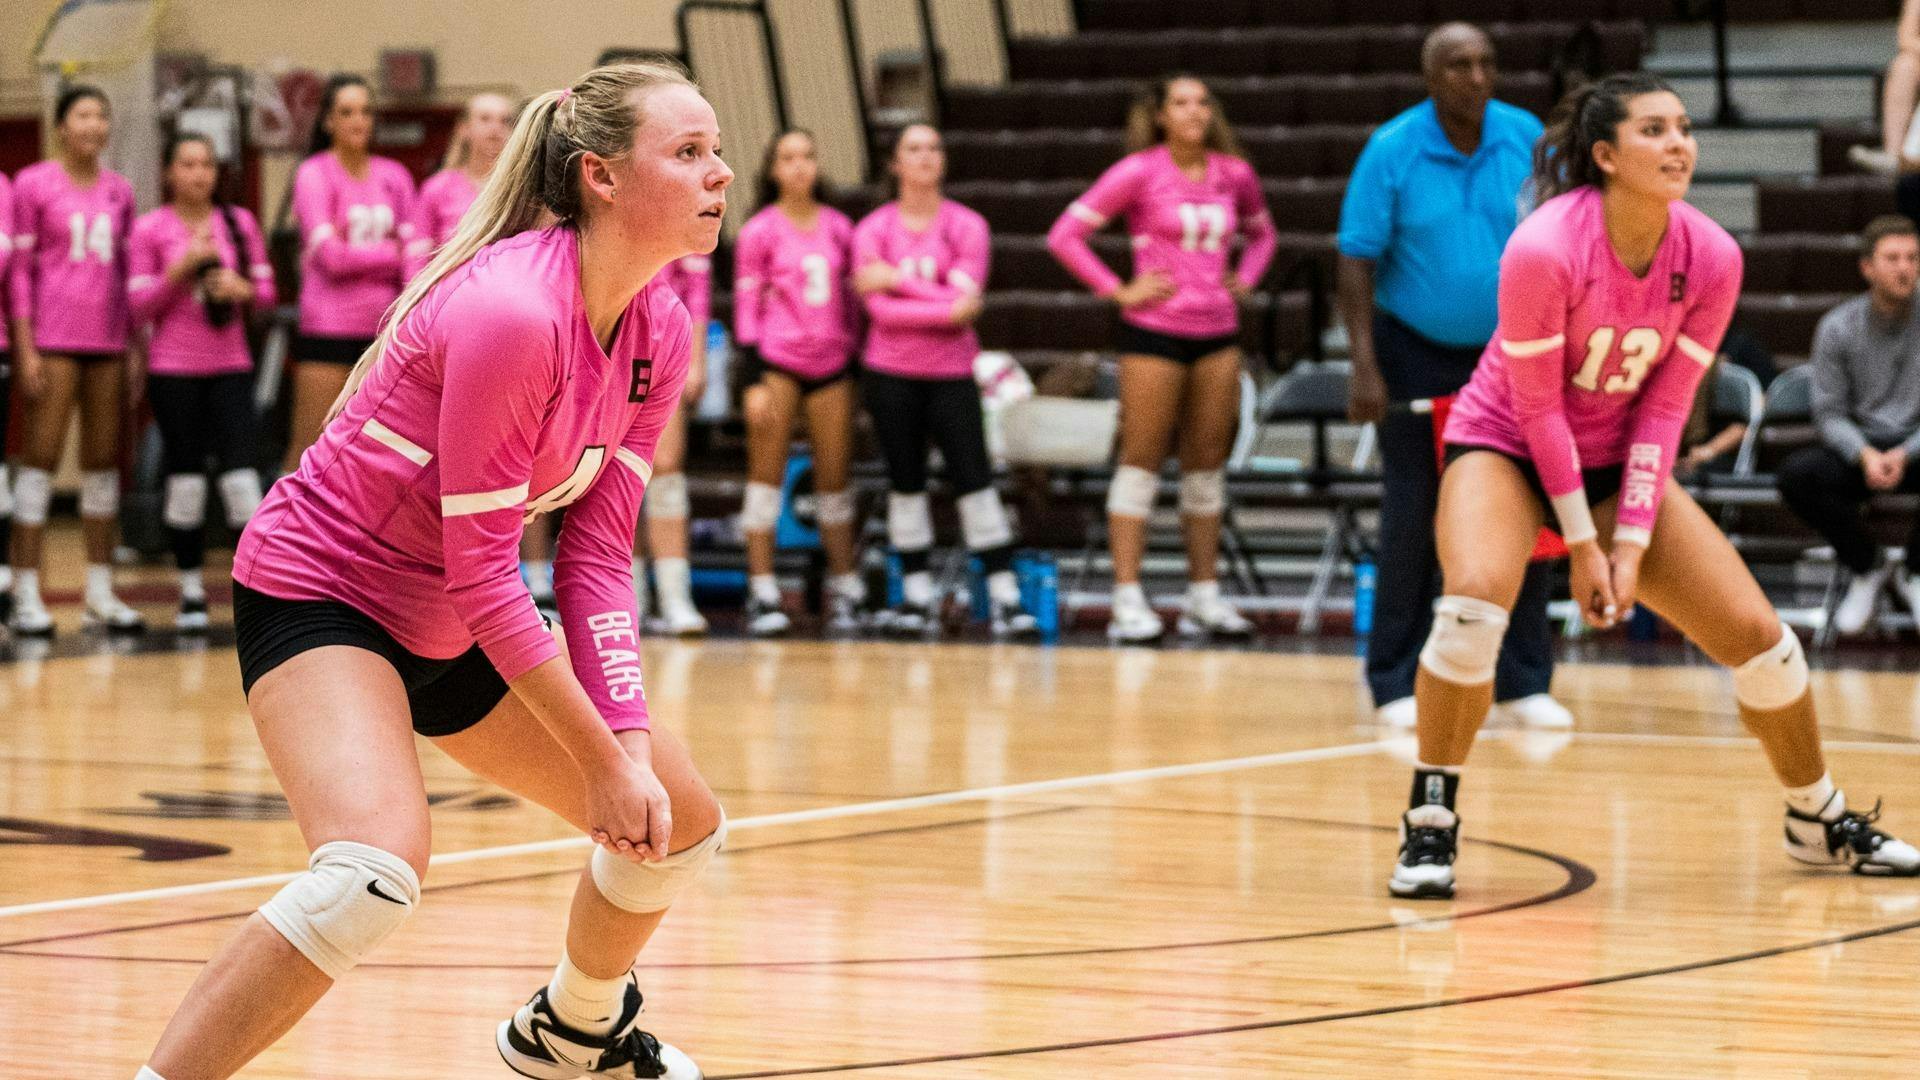 Womens volleyball continues to struggle against Yale with devastating loss 